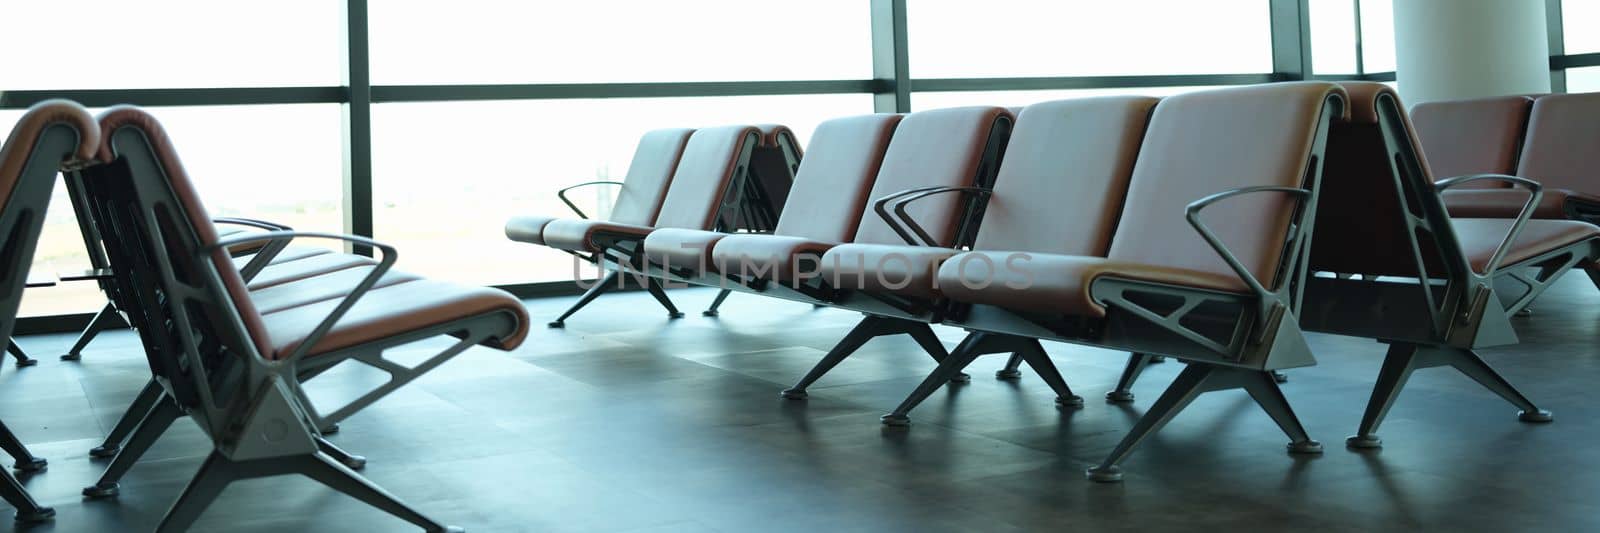 Empty departure hall at airport or international train station. Stylish interior and leather seats at airport concept